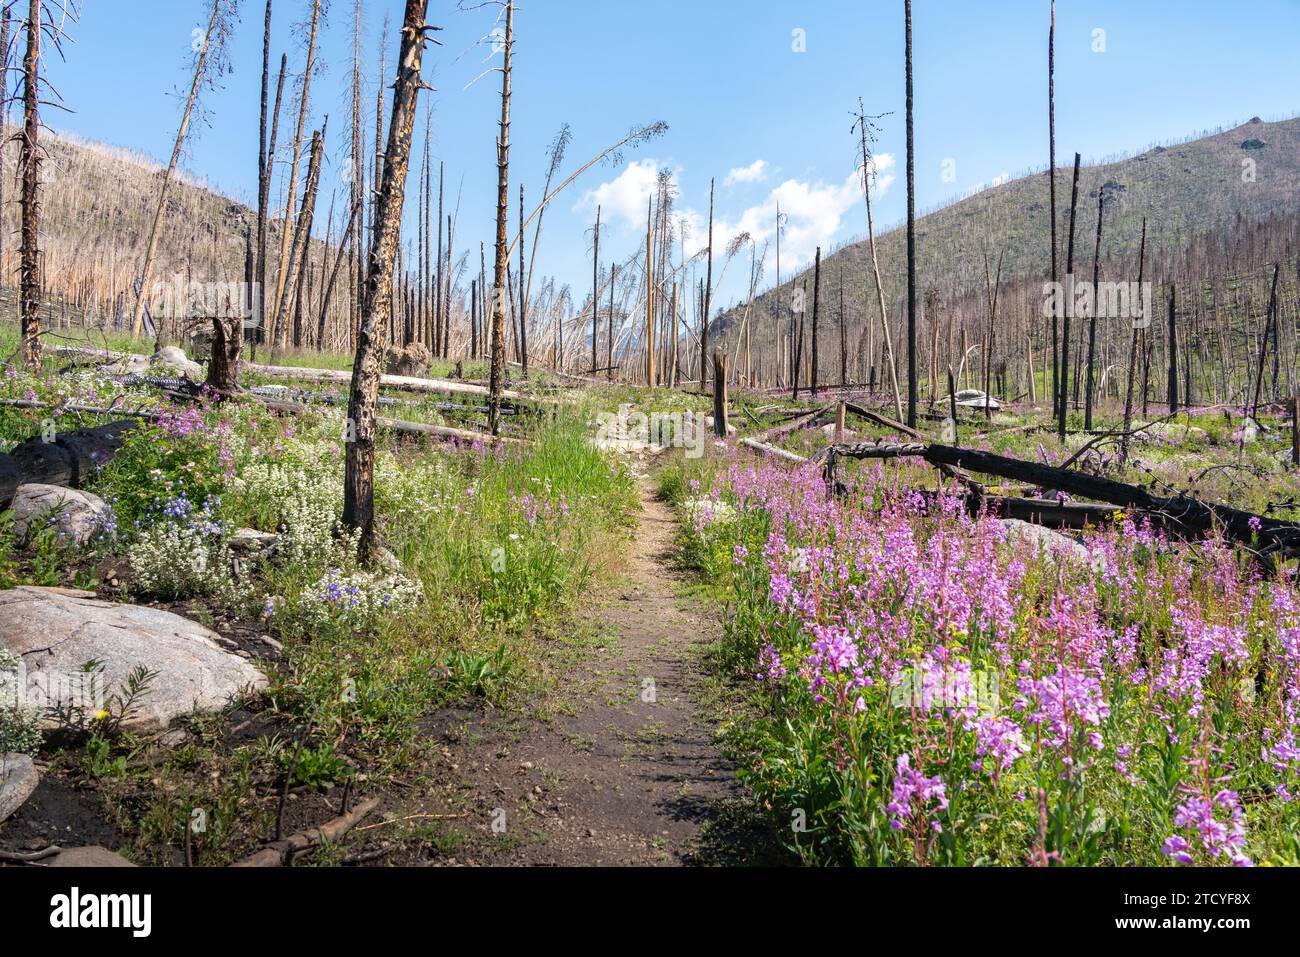 A hiking path through a regenerating forest dotted with fireweed, Rocky Mountain NP. Stock Photo